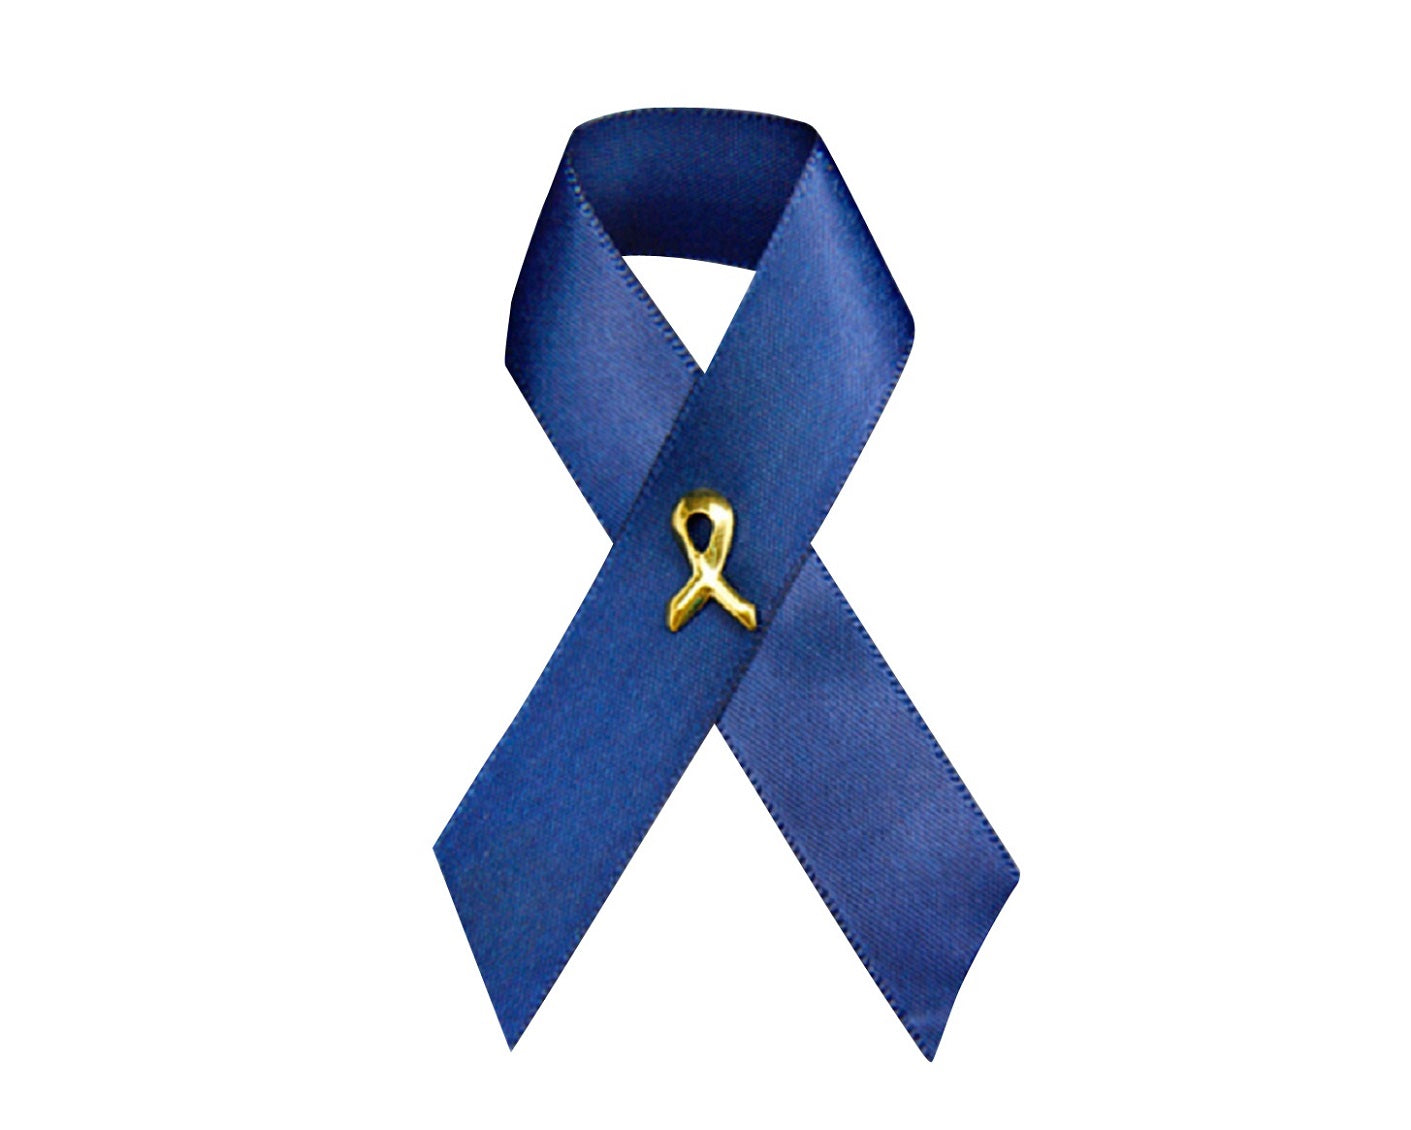 30,000+ Dark Blue Ribbon Pictures